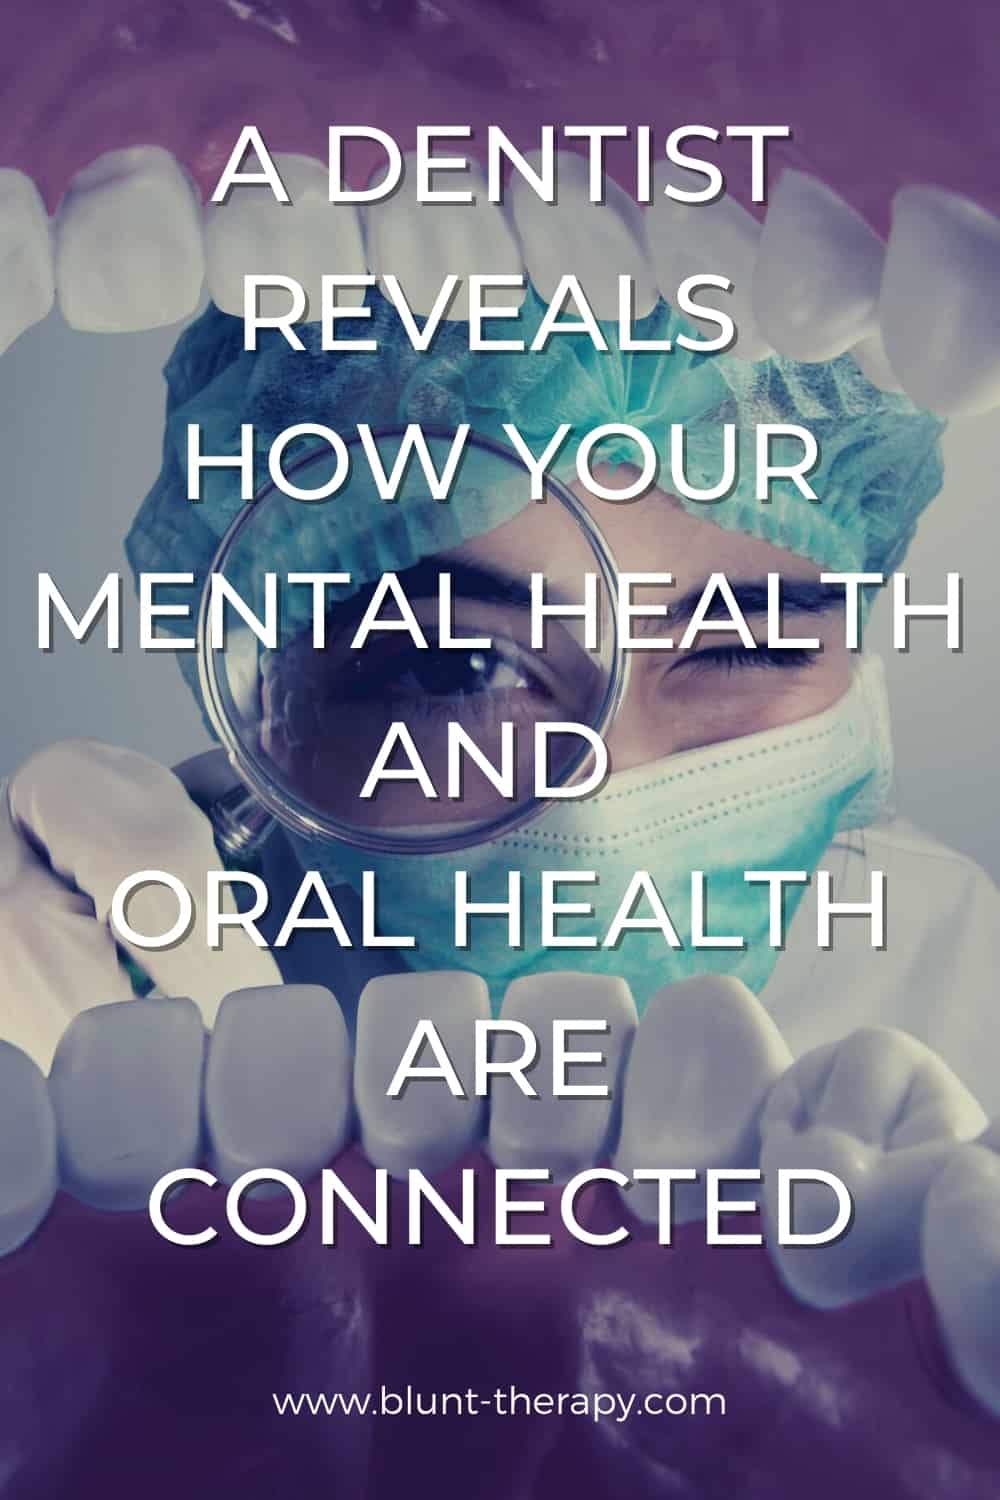 A Dentist Reveals How Your Mental Health and Oral Health Are Connected